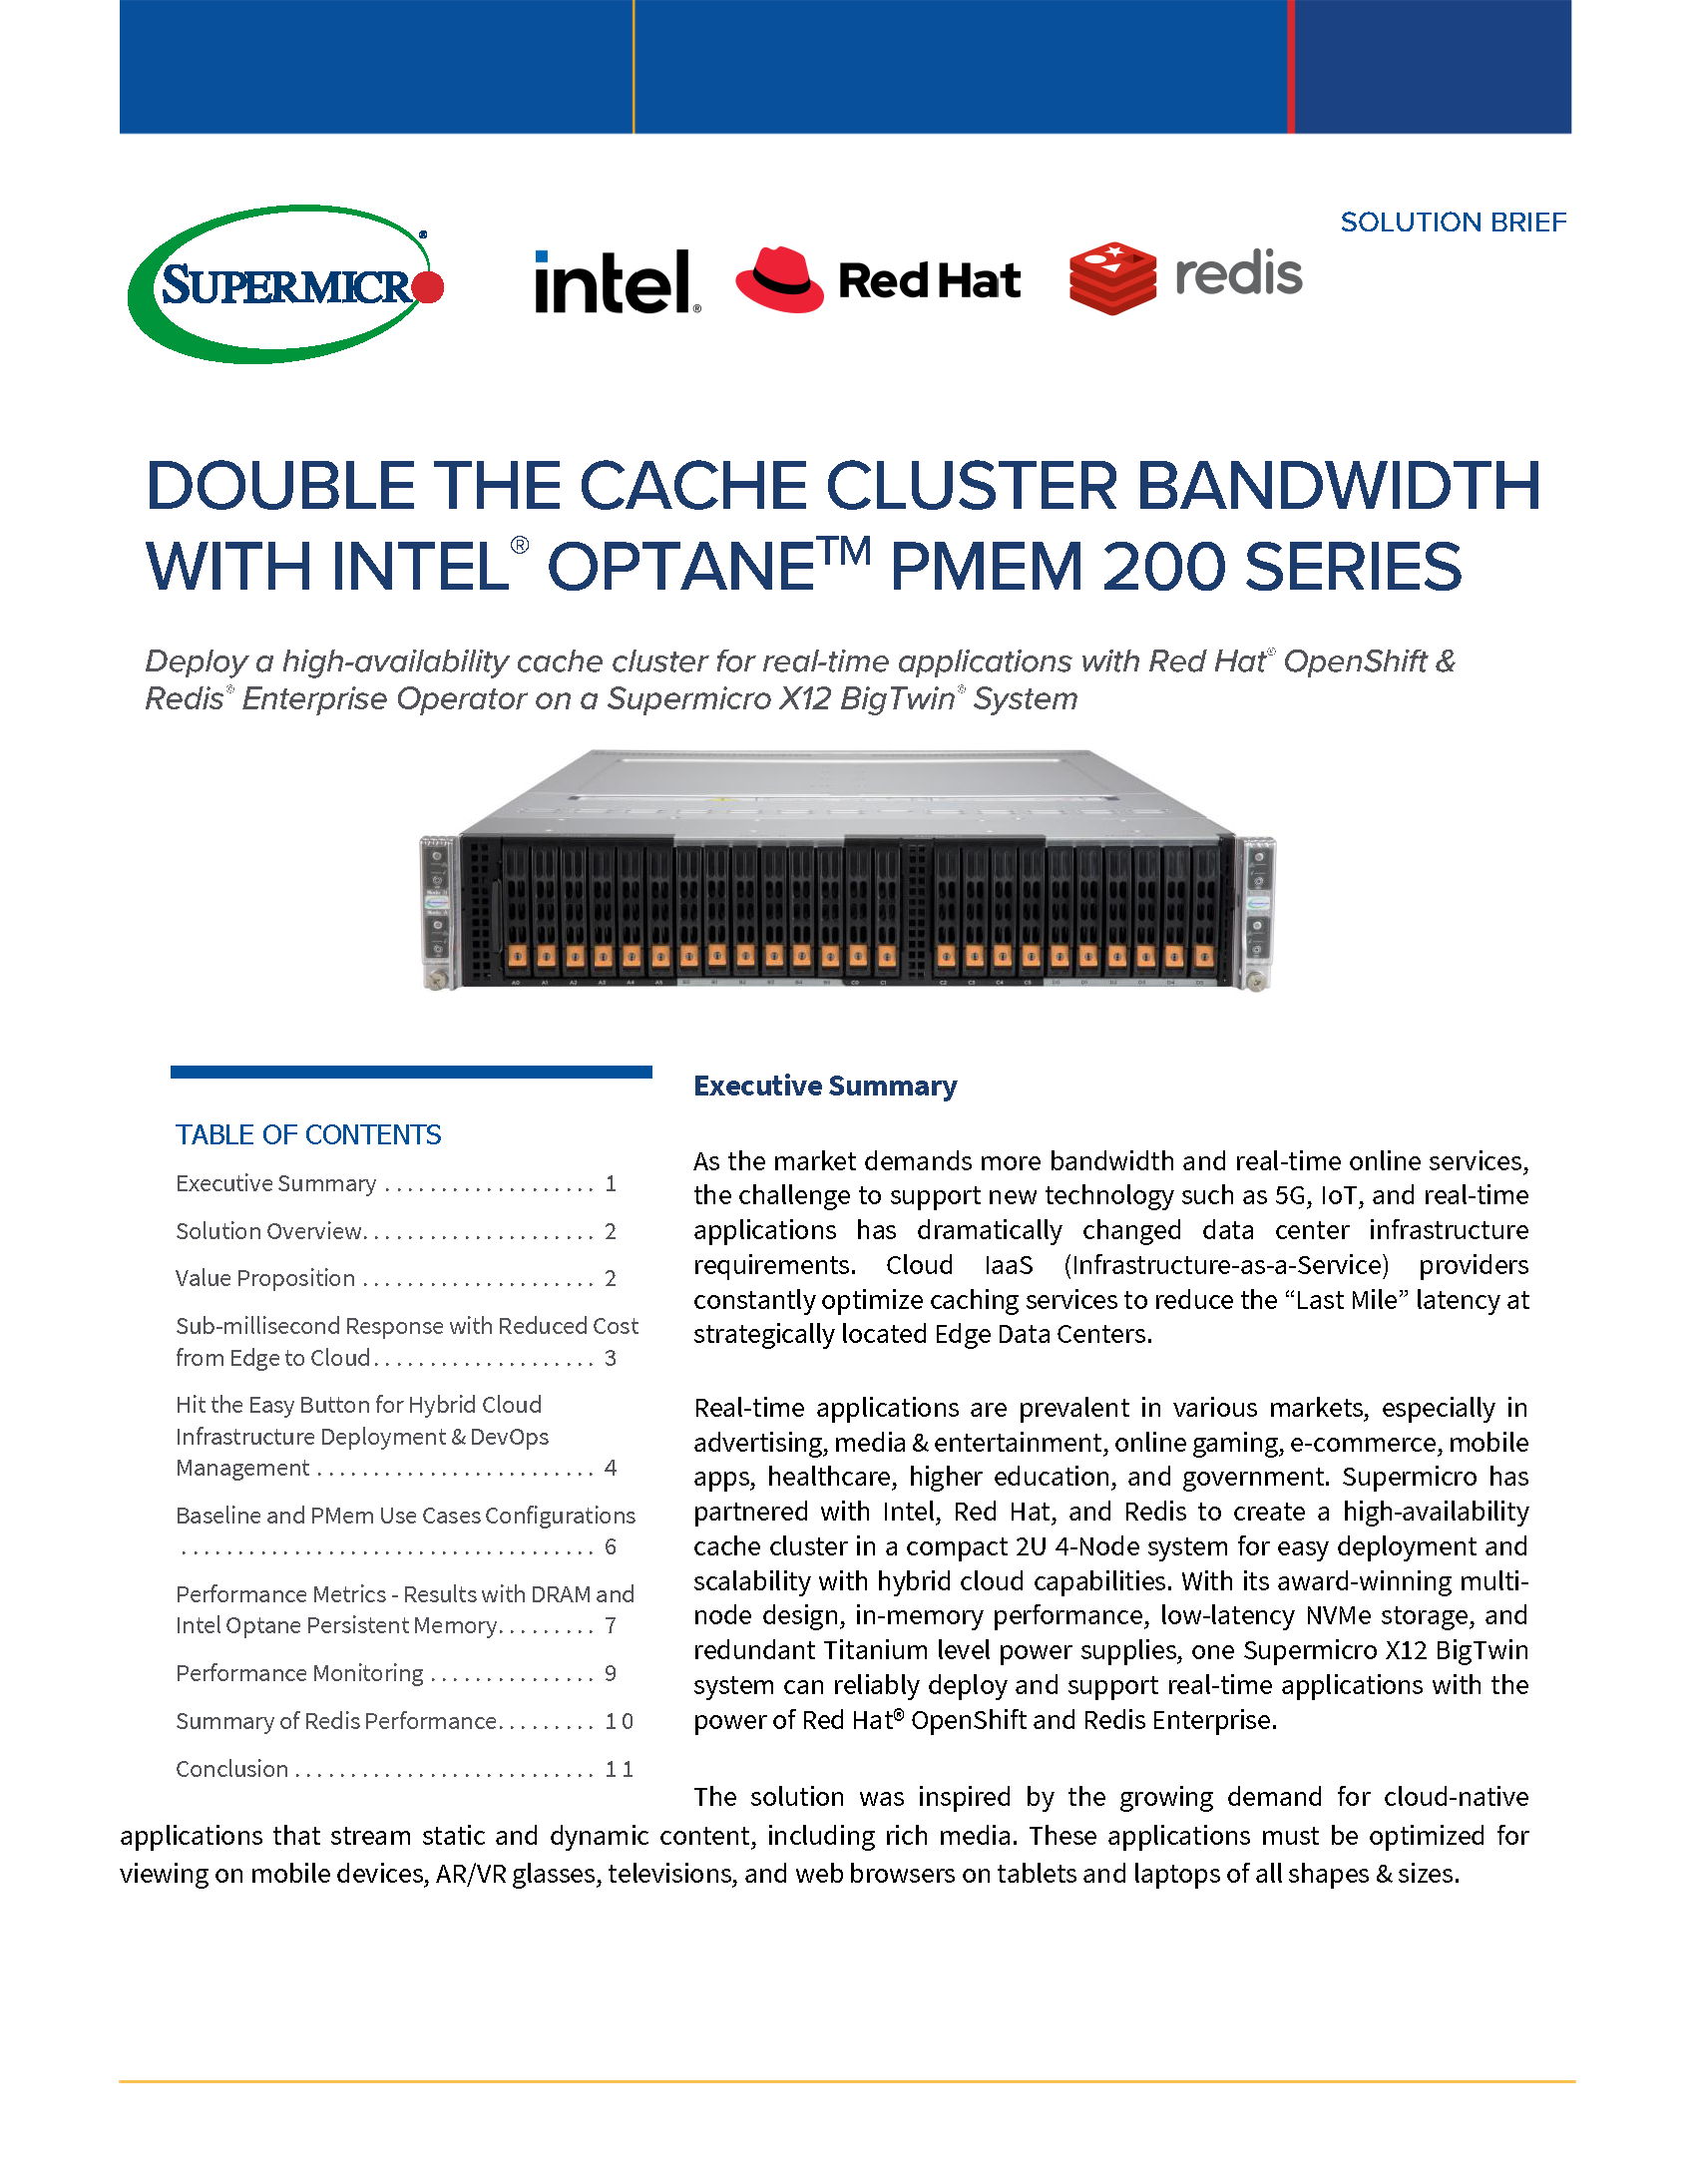 Double the Cache Cluster Bandwidth with Intel® Optane™ PMem 200 Series